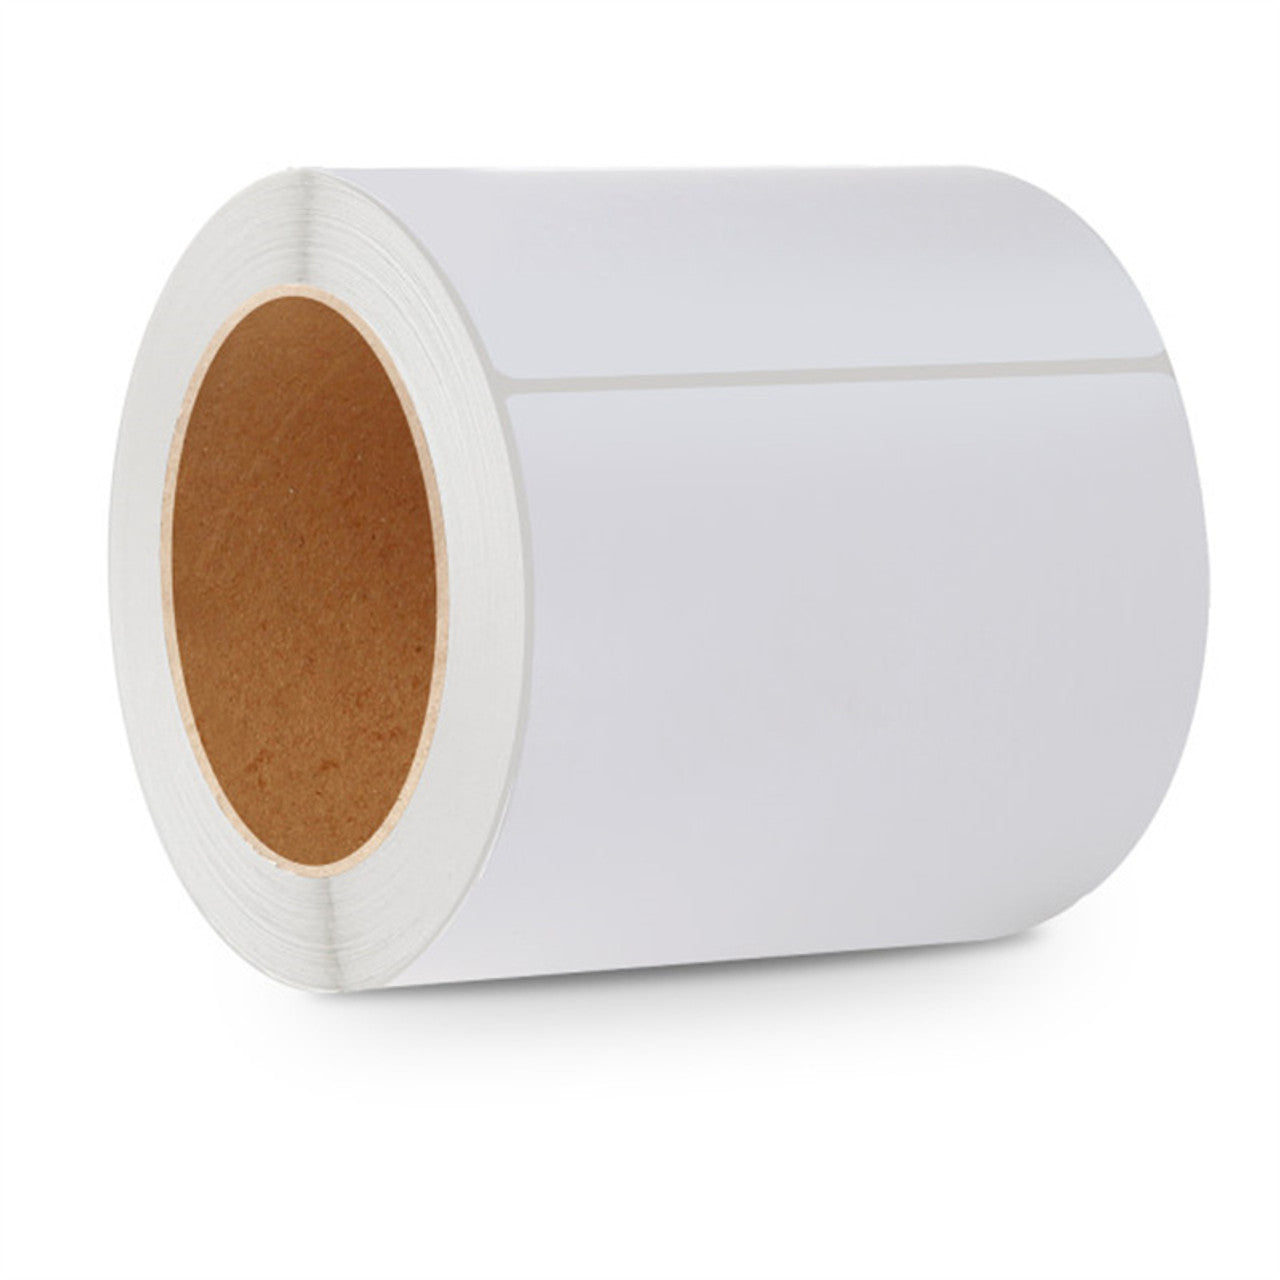 4" x 4" Direct Thermal Roll Labels - Strong Adhesive Labels, Desktop Printer Roll Labels